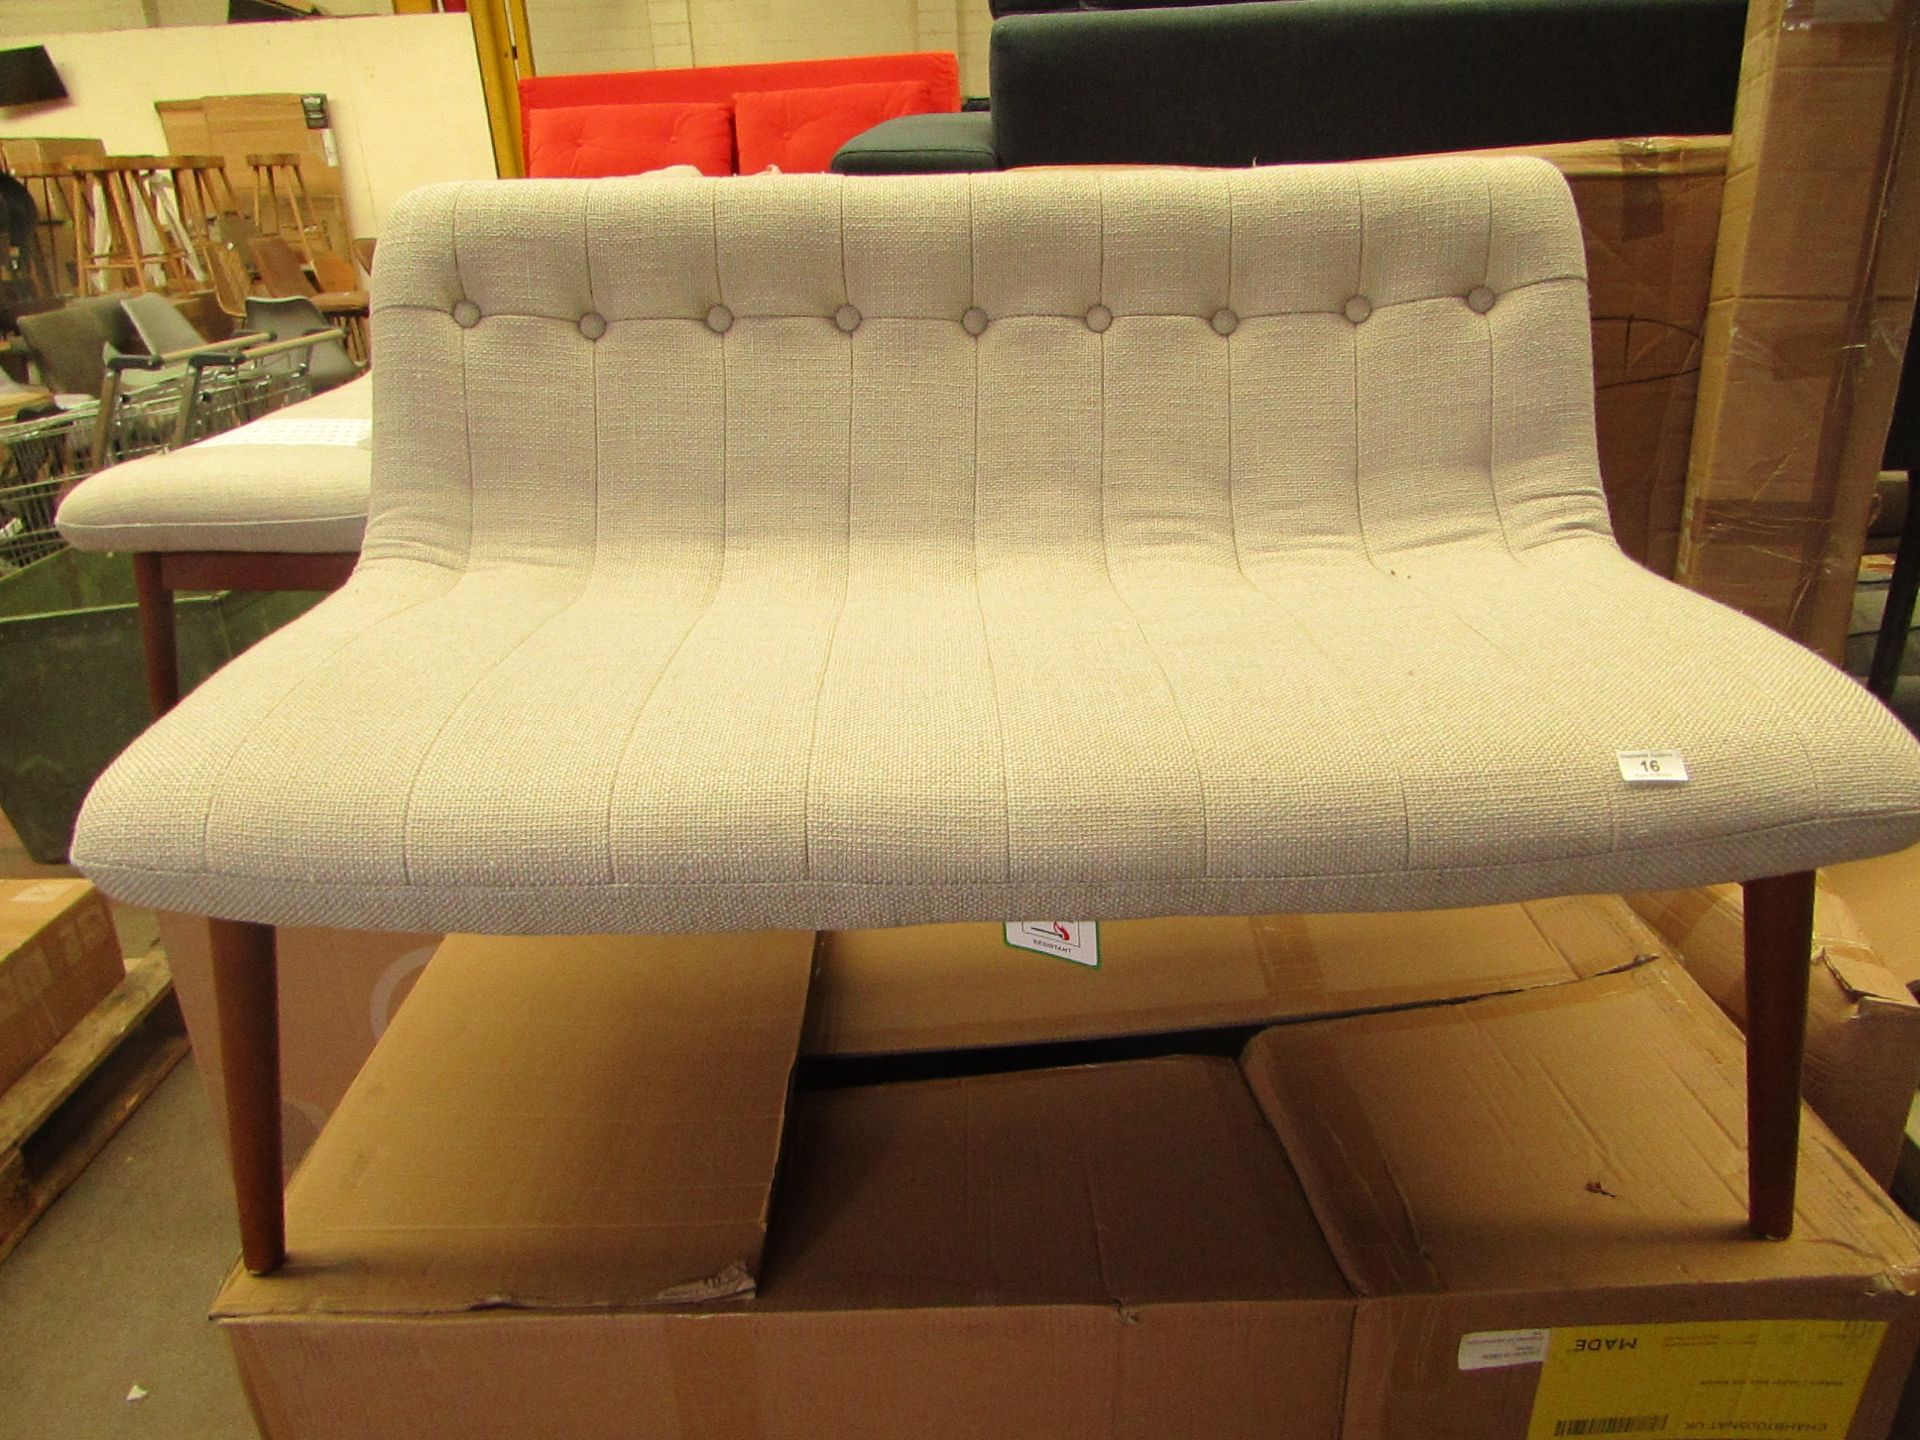 1 x Halbert 2 Seater Sofa, Oat Weave SKU MAD-CHAHBT005NAT-UK TOTAL RRP £299 This lot is a completely